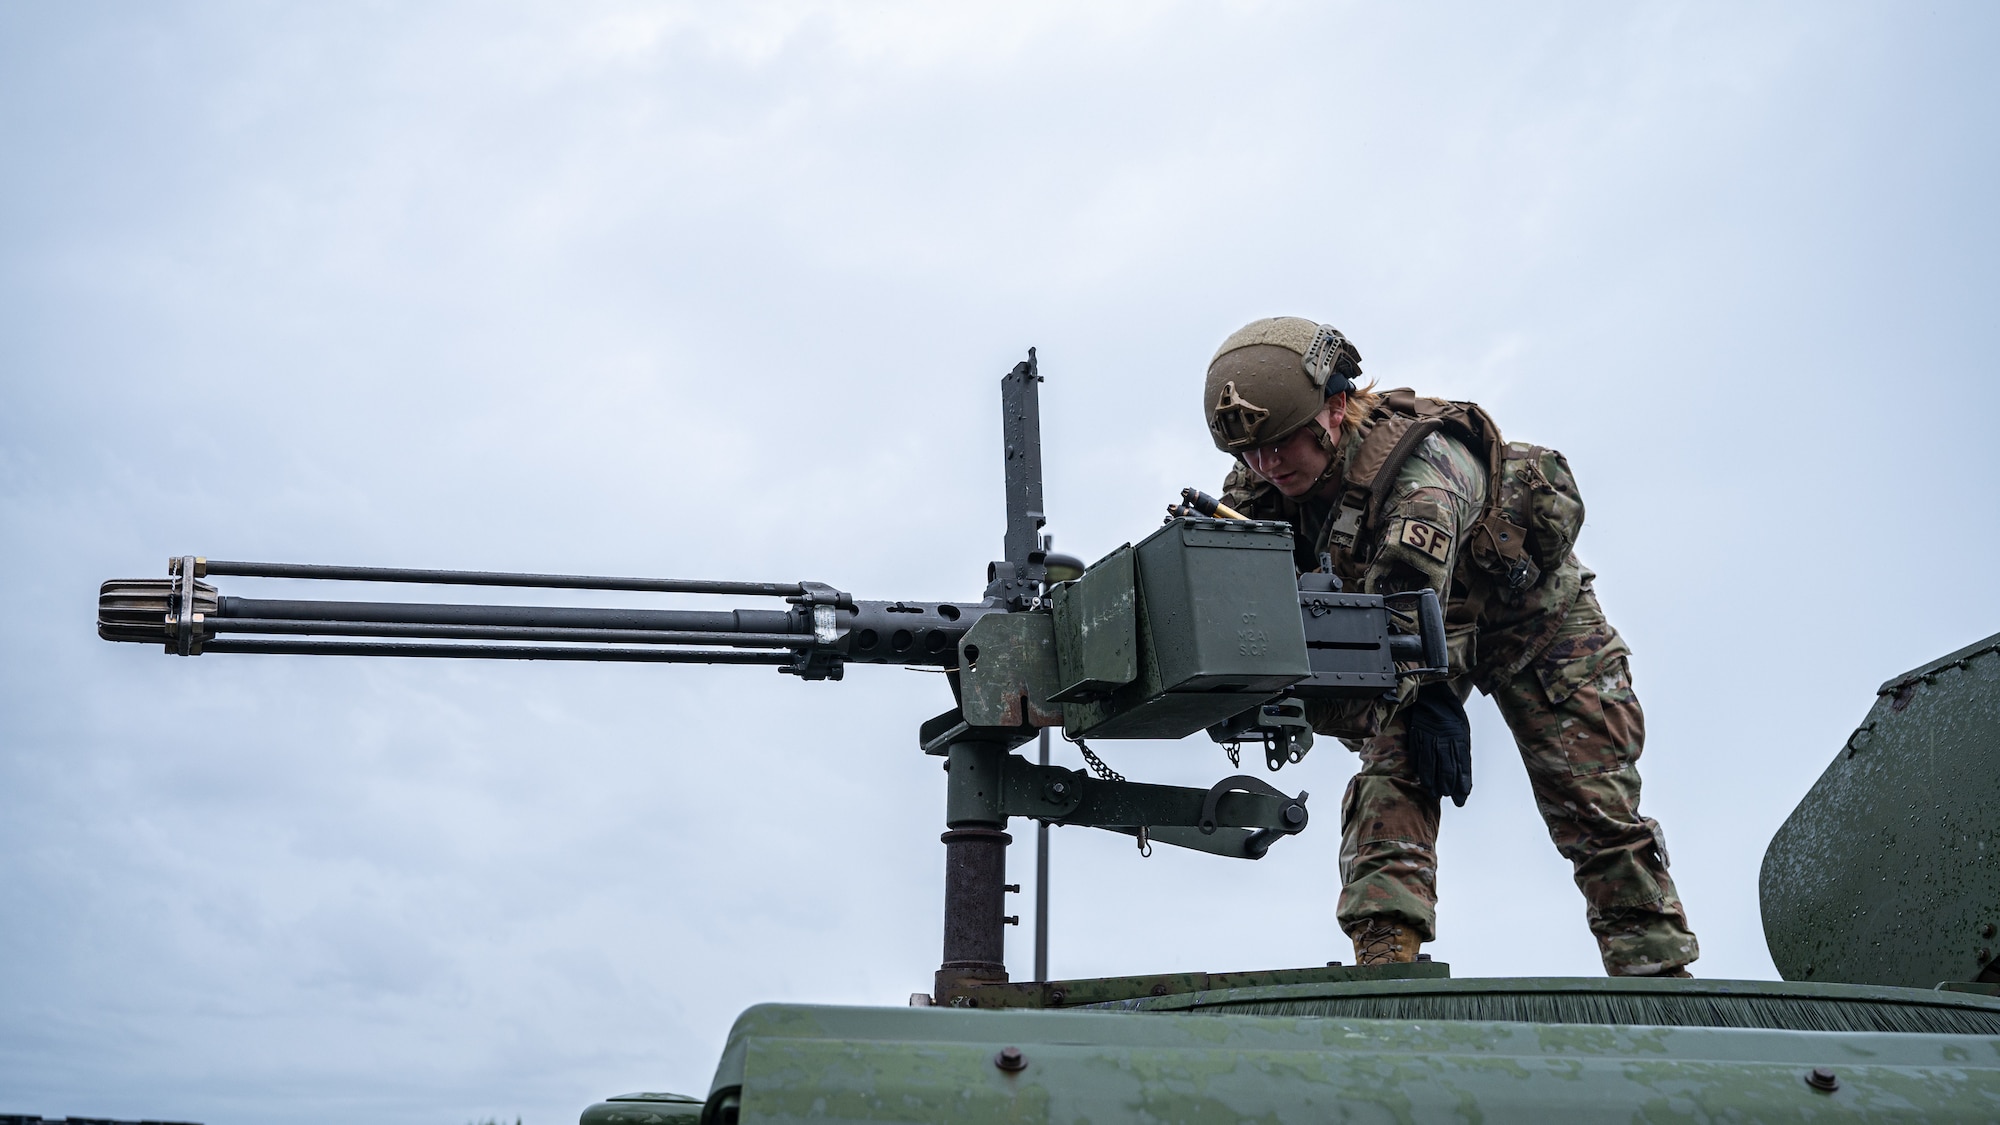 Airman 1st Class Devalcalamoin McLaughlin, 8th Security Forces Squadron installation entry controller, reloads a mounted armament during a base wide training event